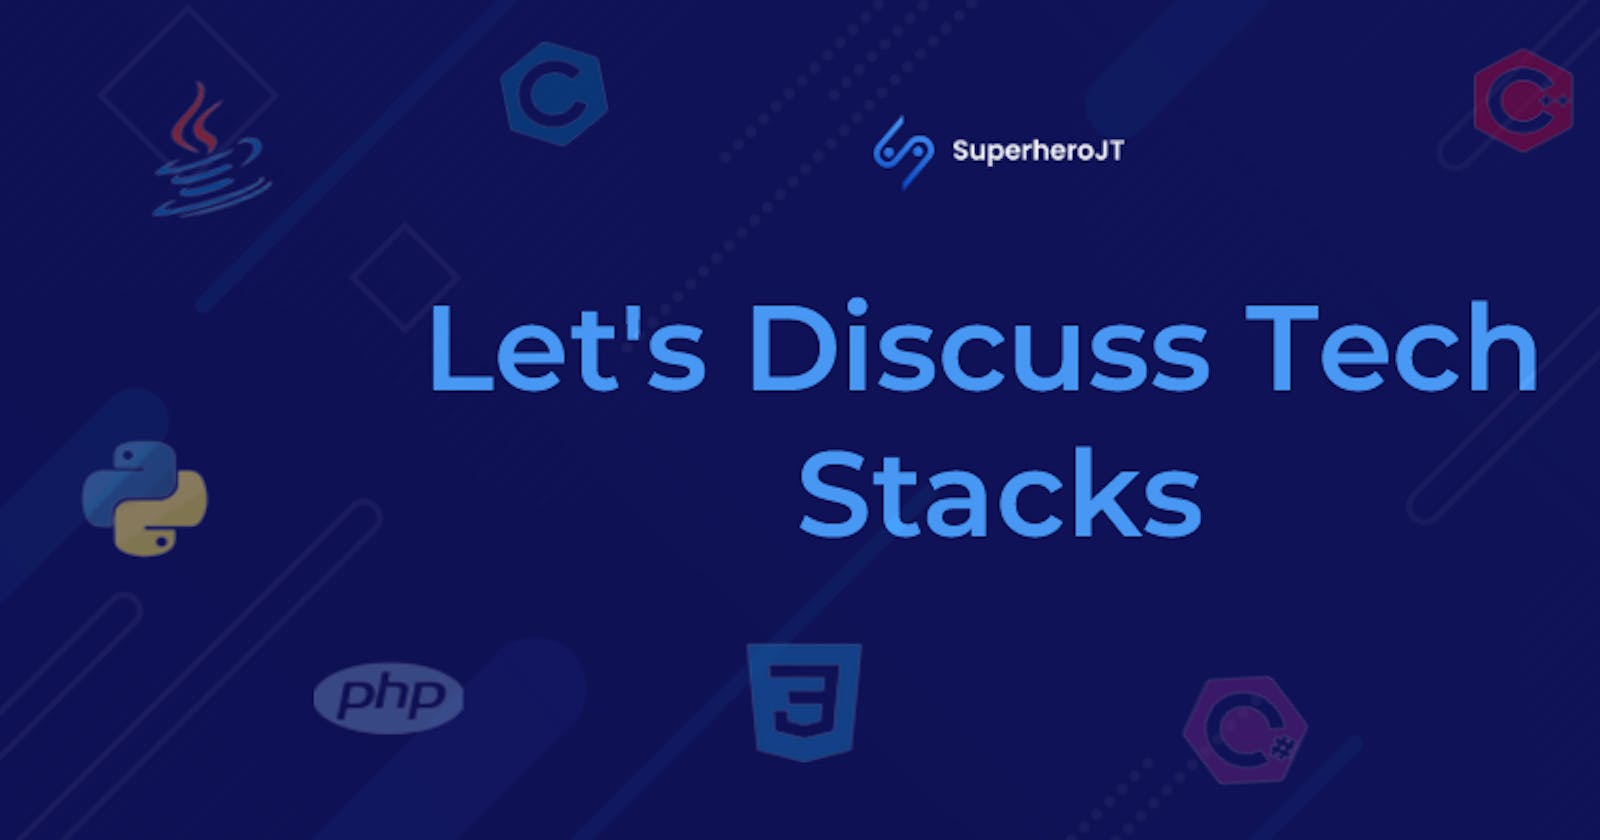 What does a tech stack mean?